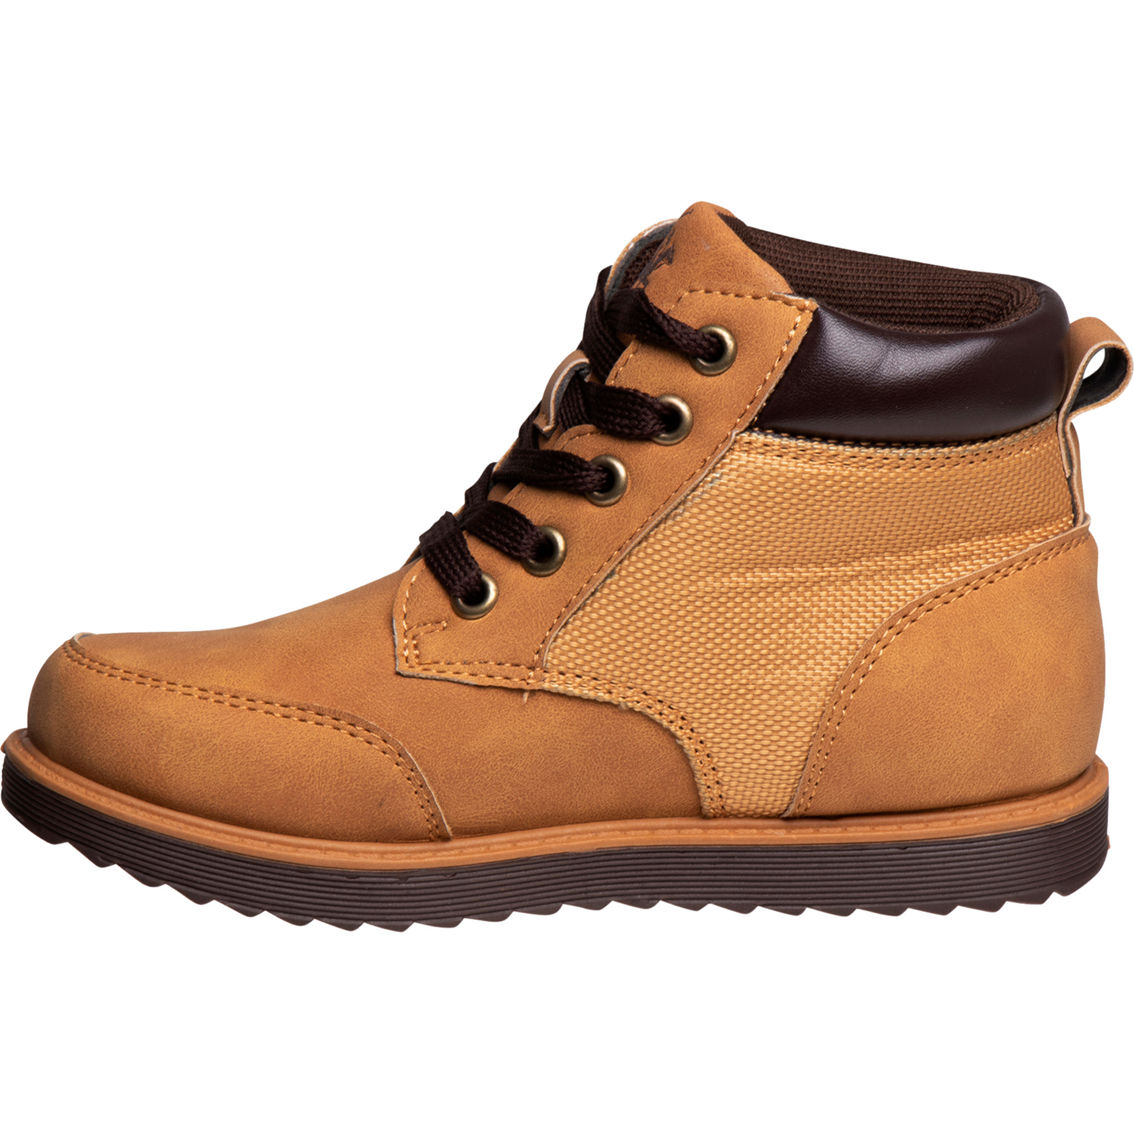 Beverly Hills Polo Club Preschool Boys Casual Hiker Boots - Image 2 of 5